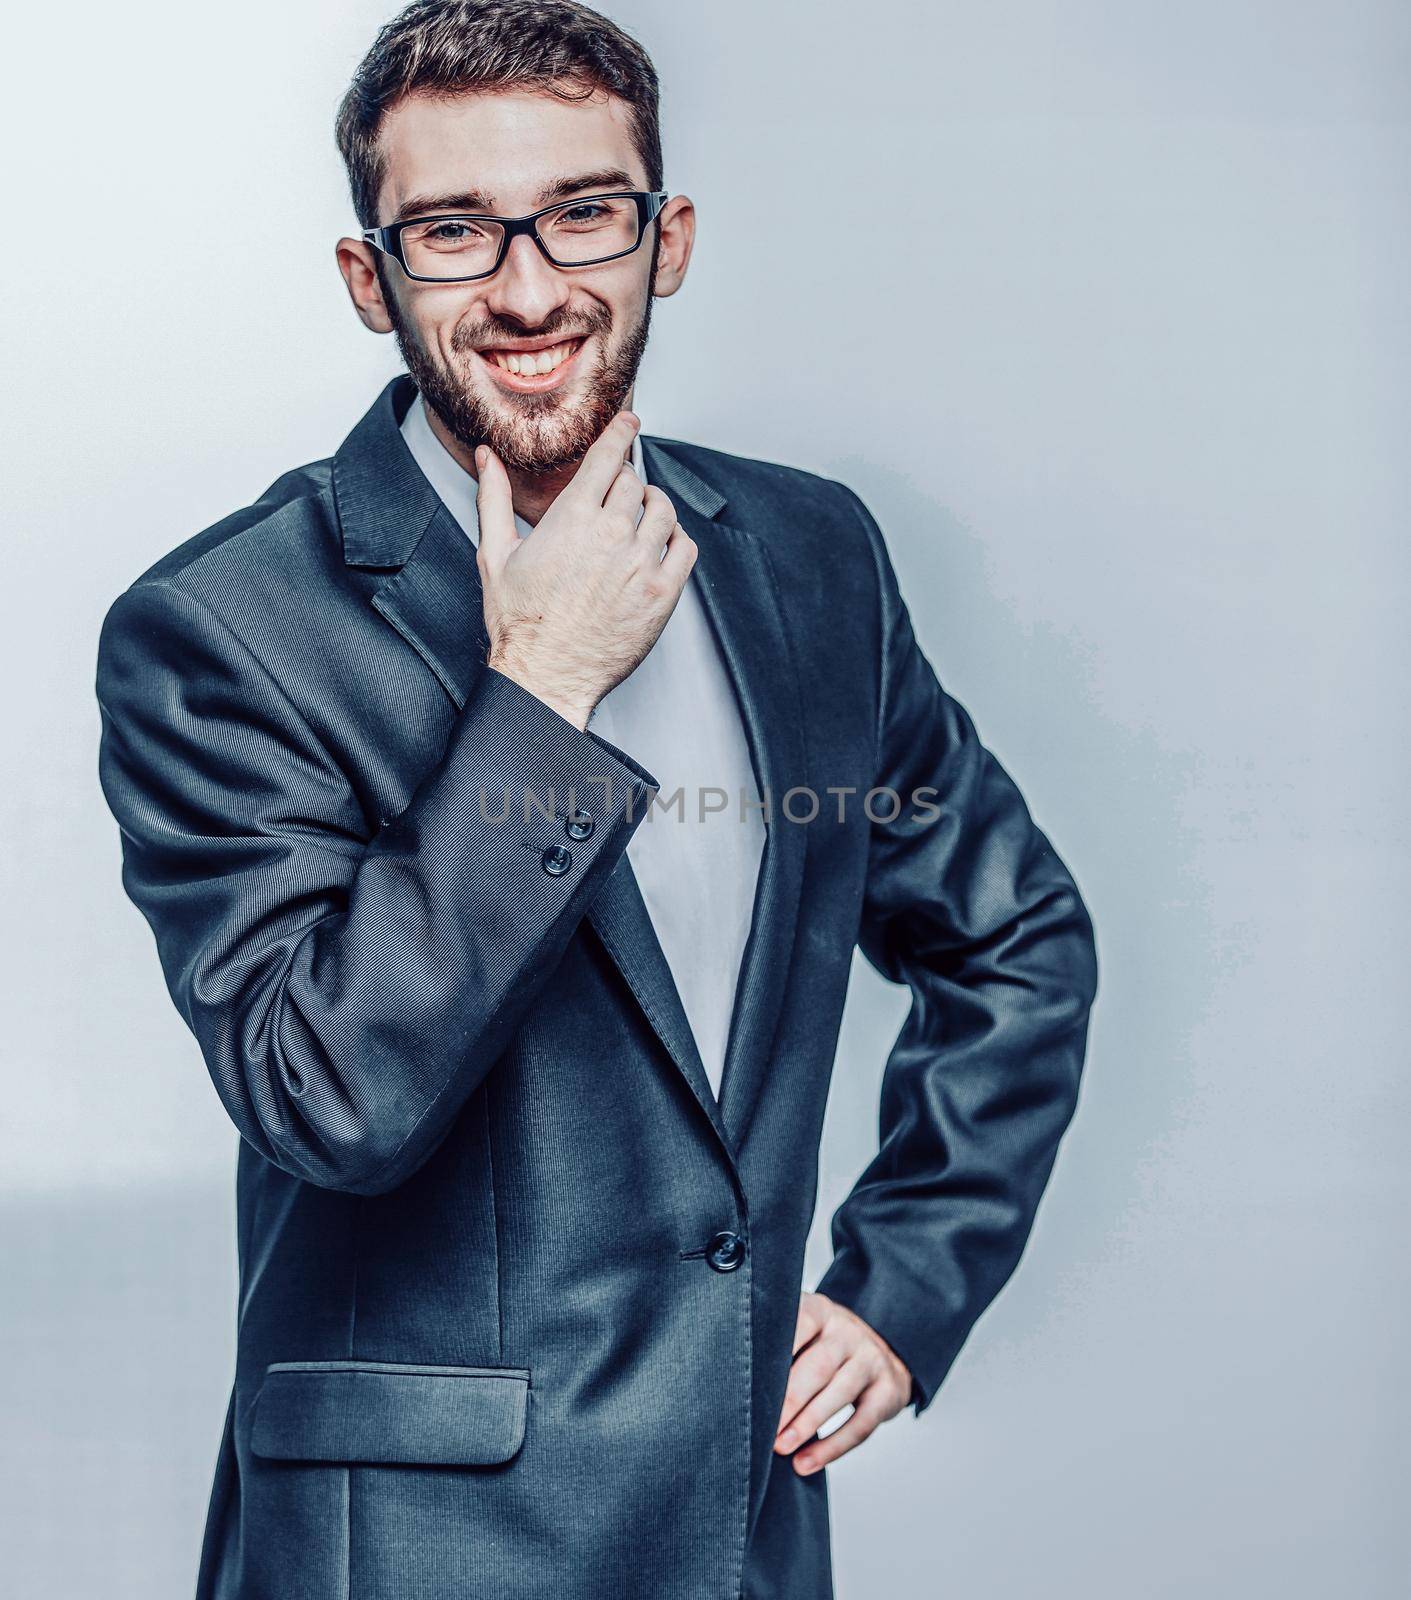 successful lawyer in a business suit on a white background.the photo has a empty space for your text.